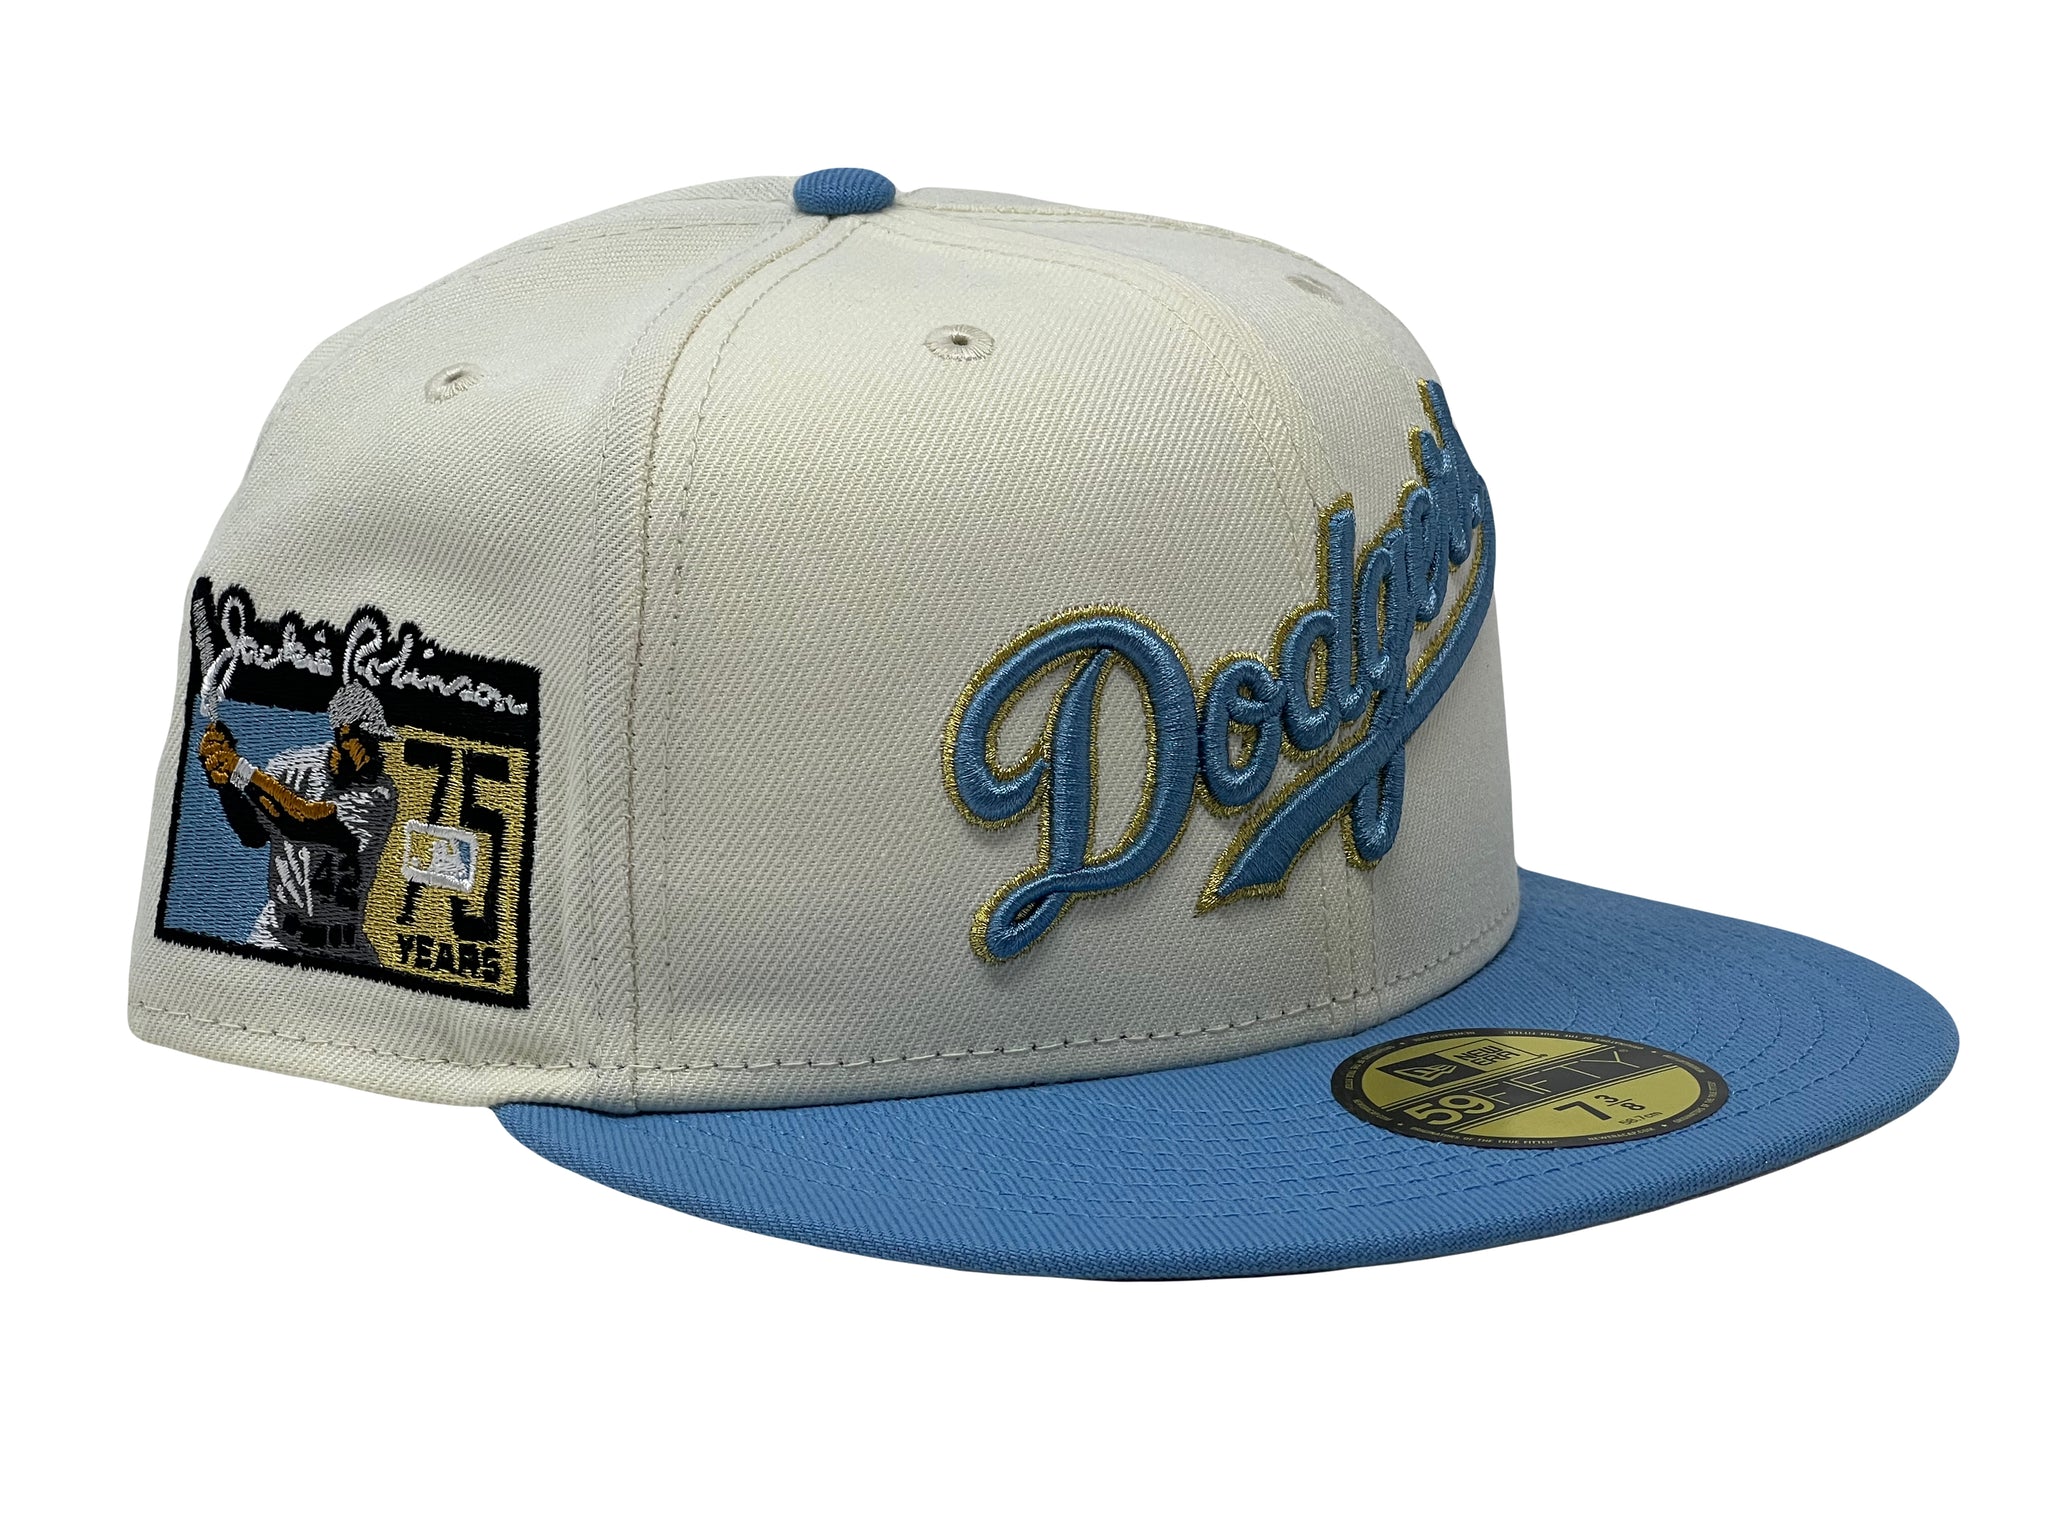 Jackie Robinson Los Angeles Dodgers White Gold & Black Gold Jersey - A